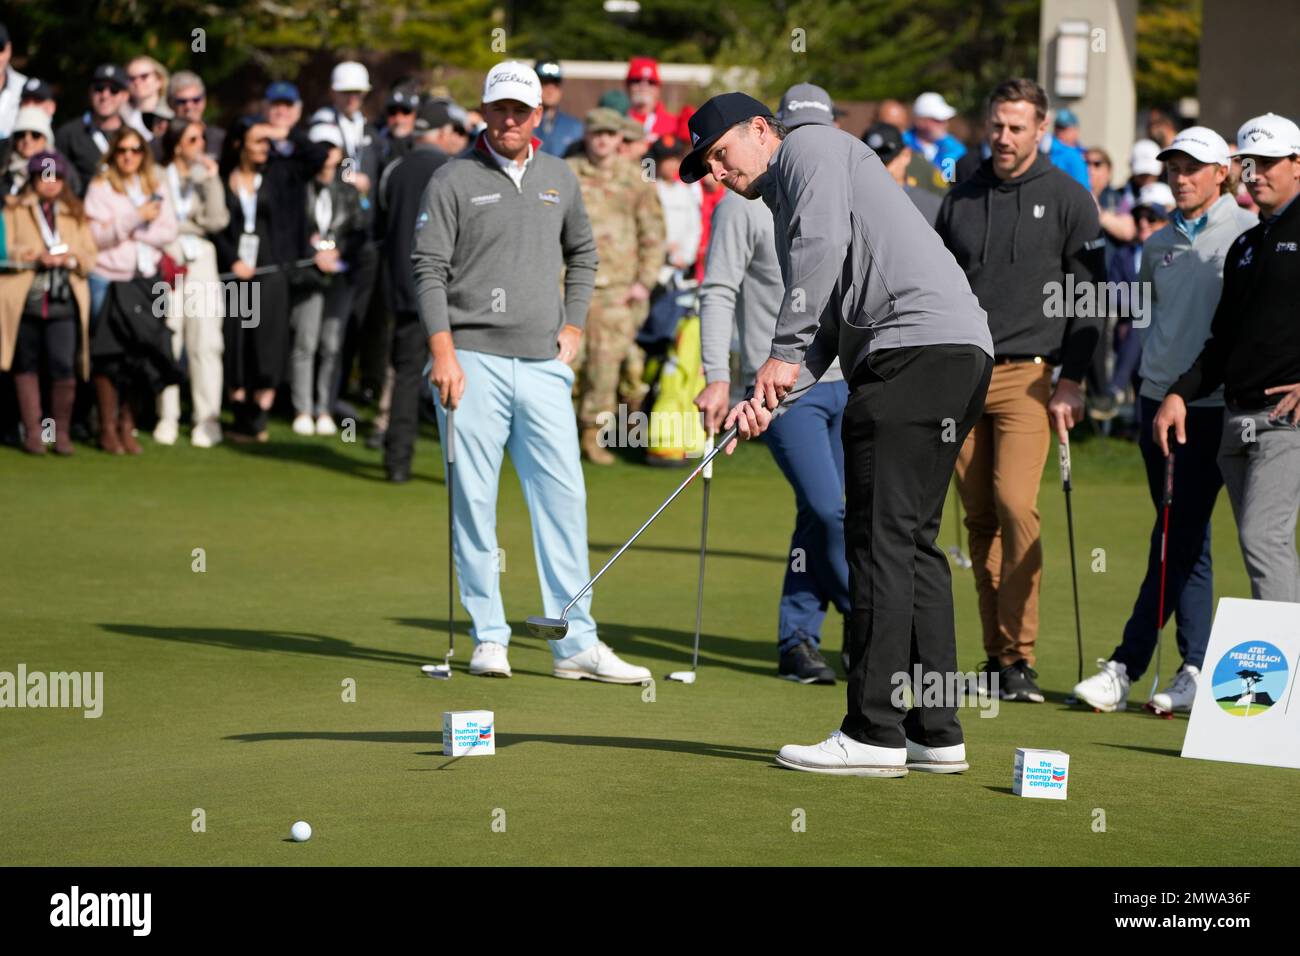 Buster Posey competes in the putting challenge event of the AT&T